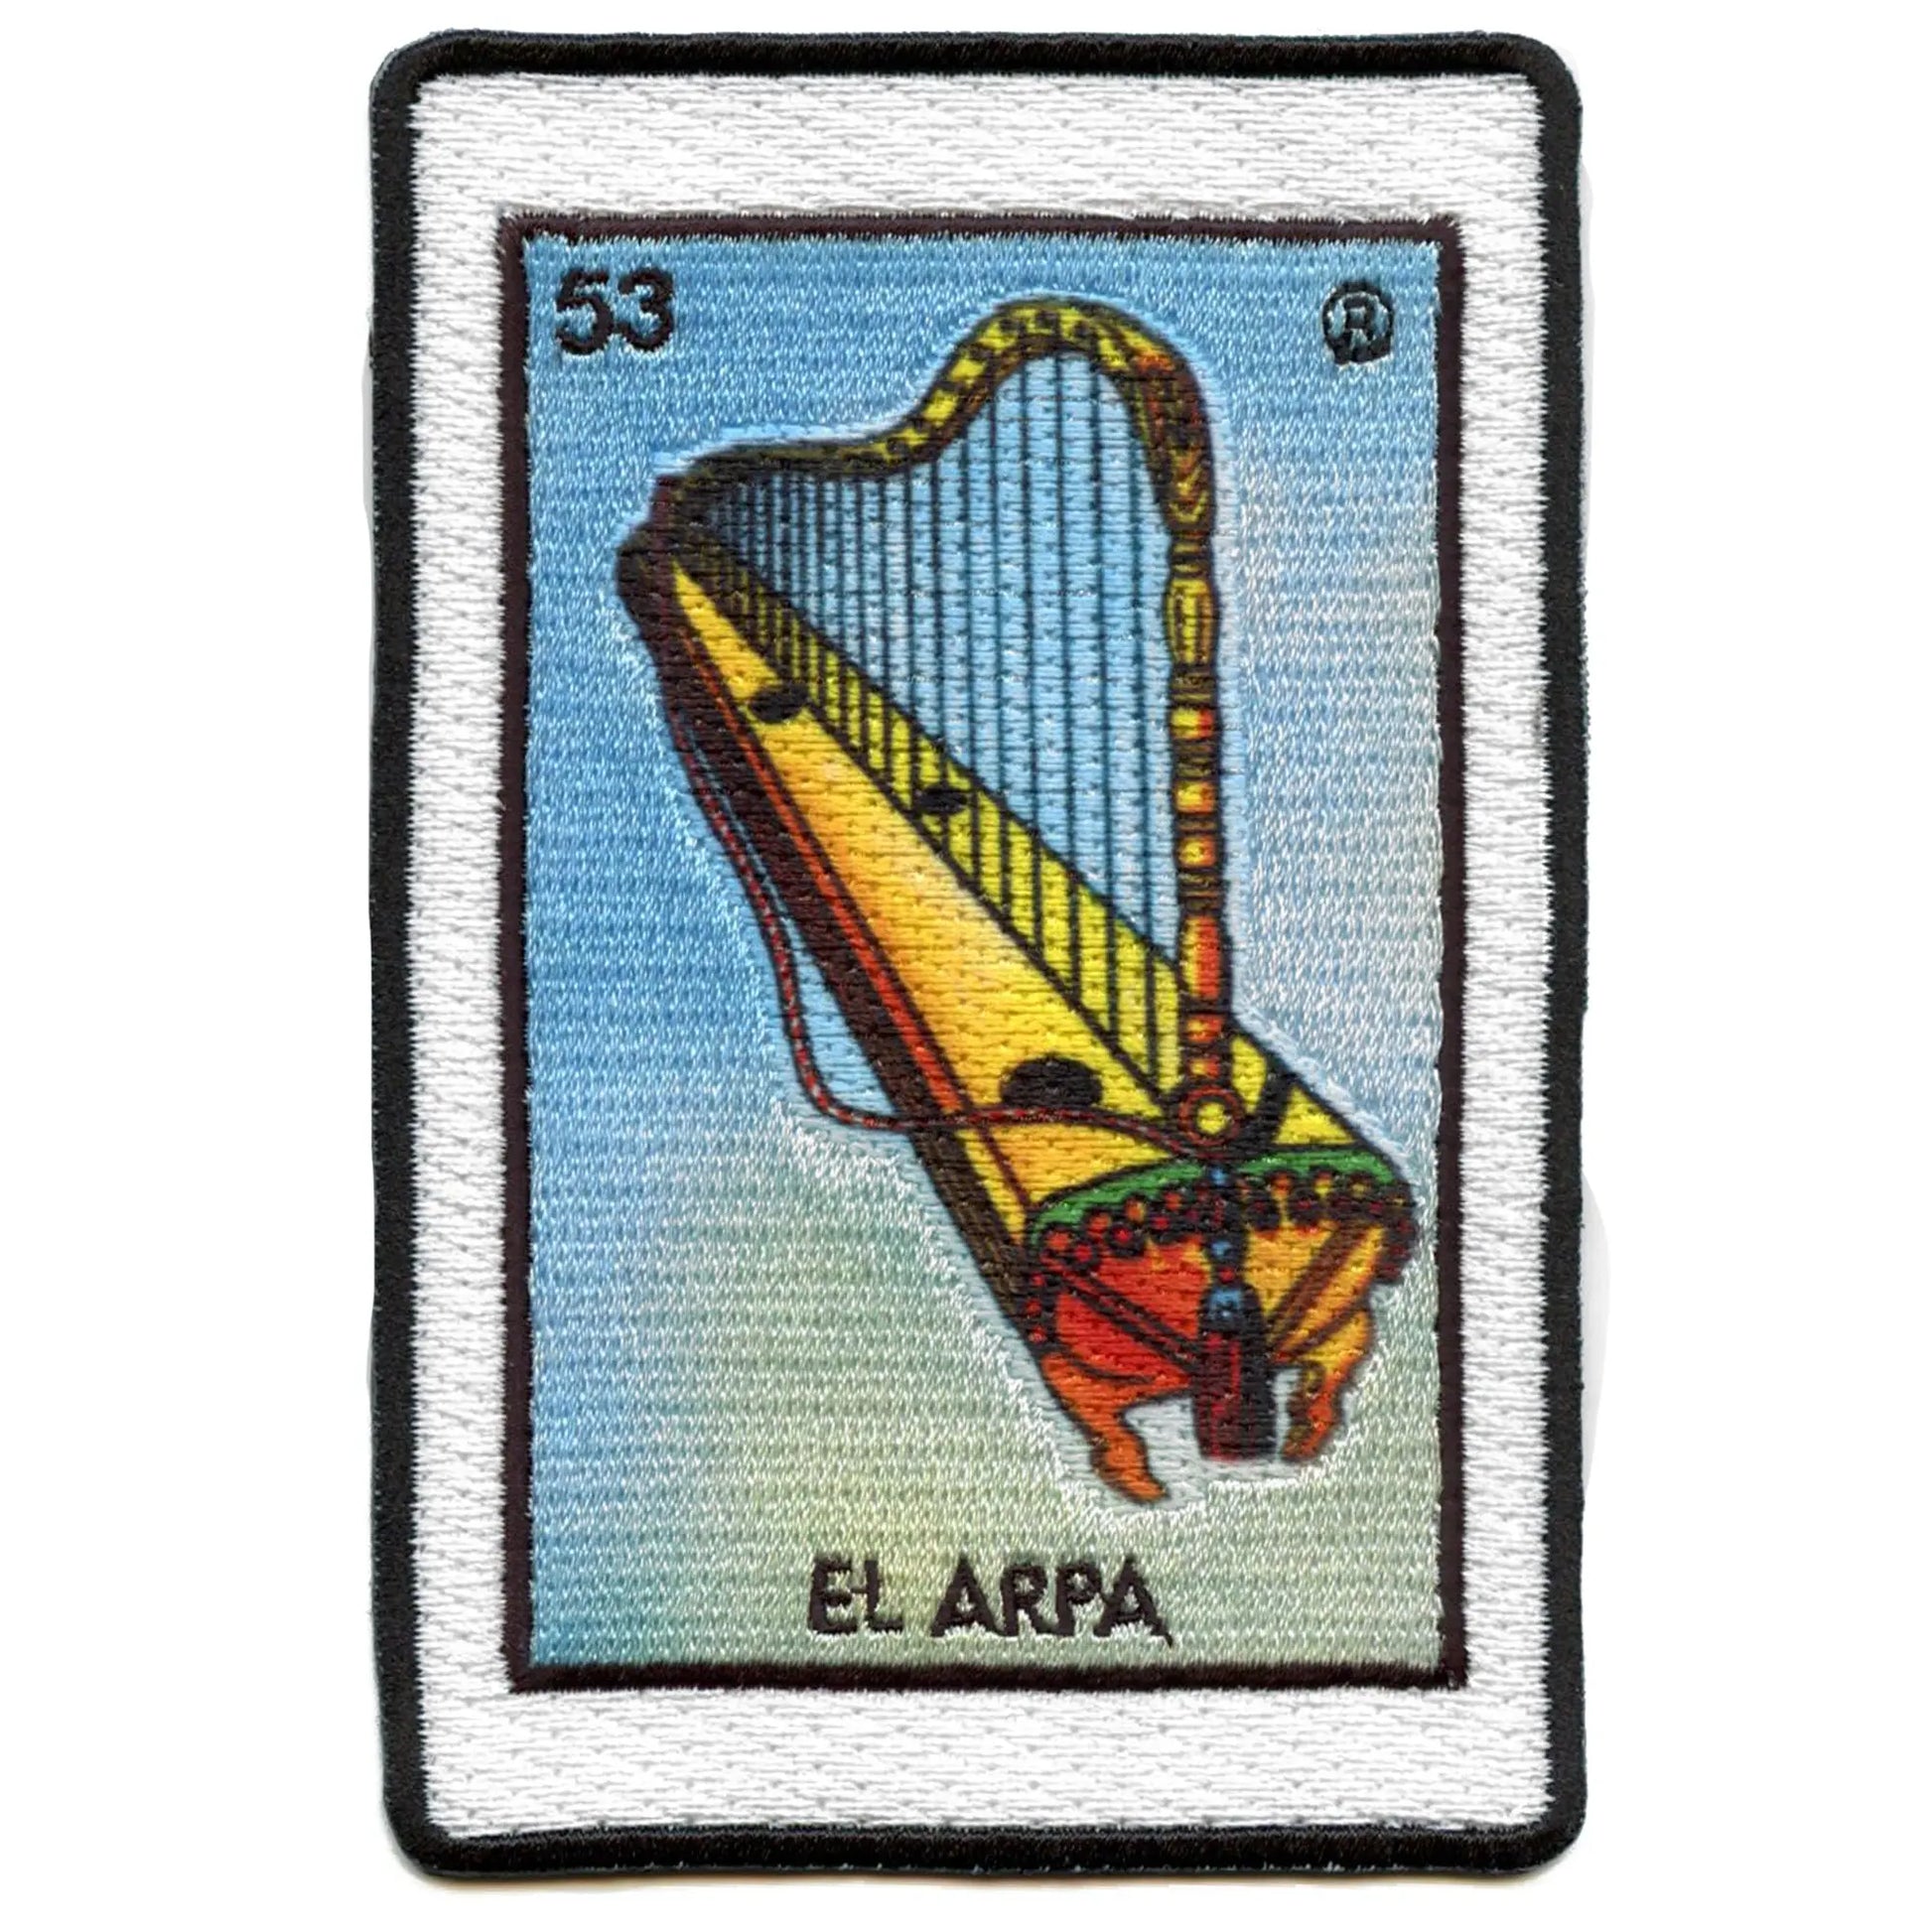 El Arpa 53 Patch Mexican Loteria Card Sublimated Embroidery Iron On